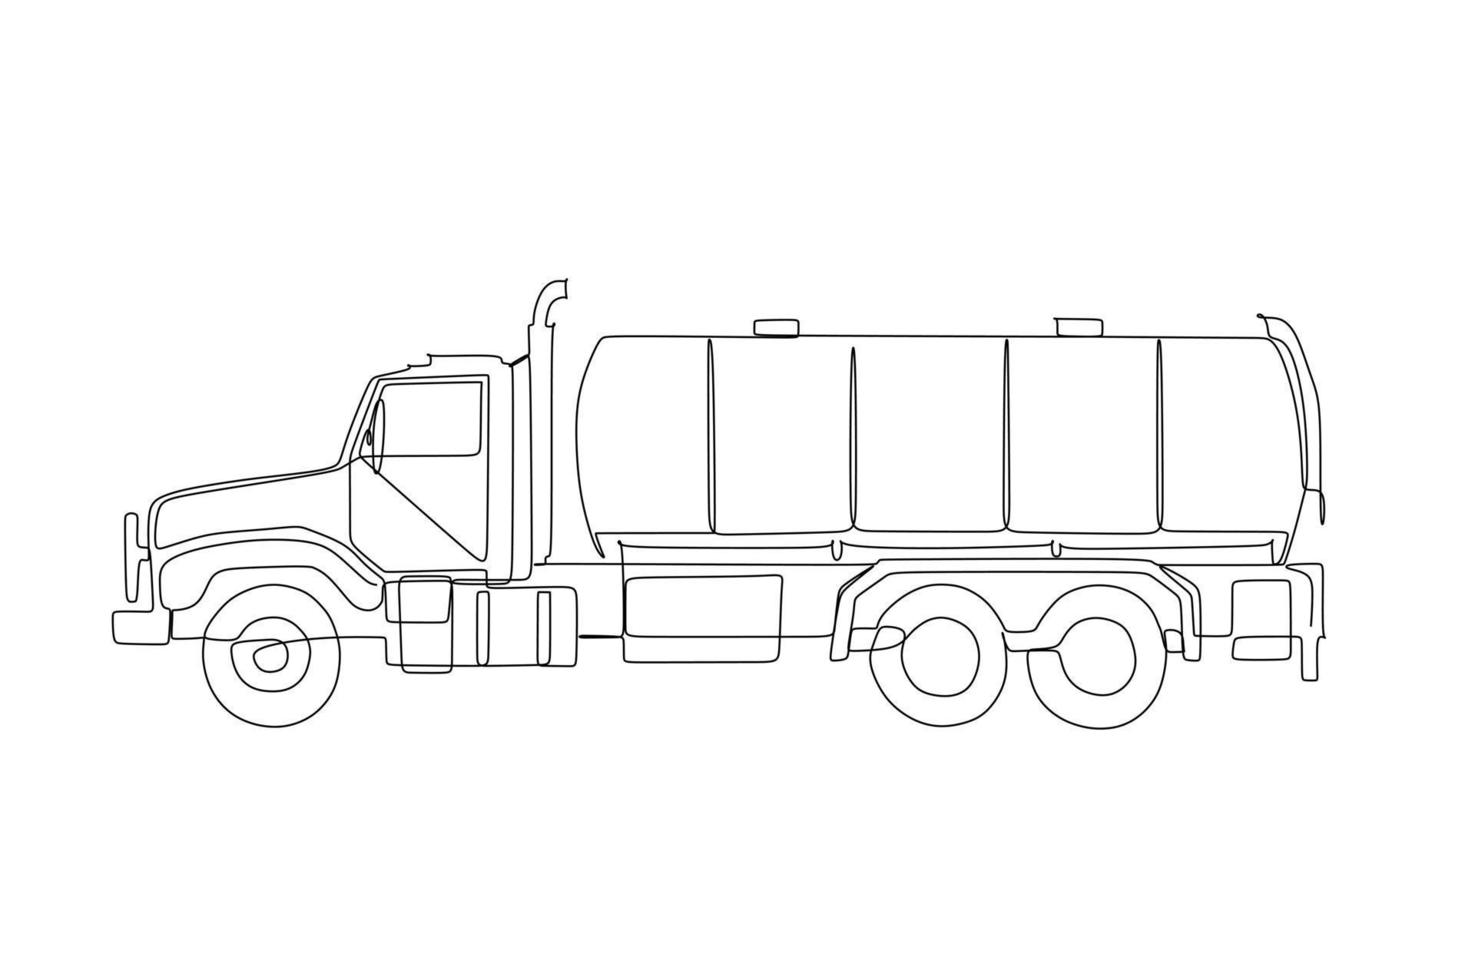 Tank truck for liquid material transportation continuous one line drawing vector